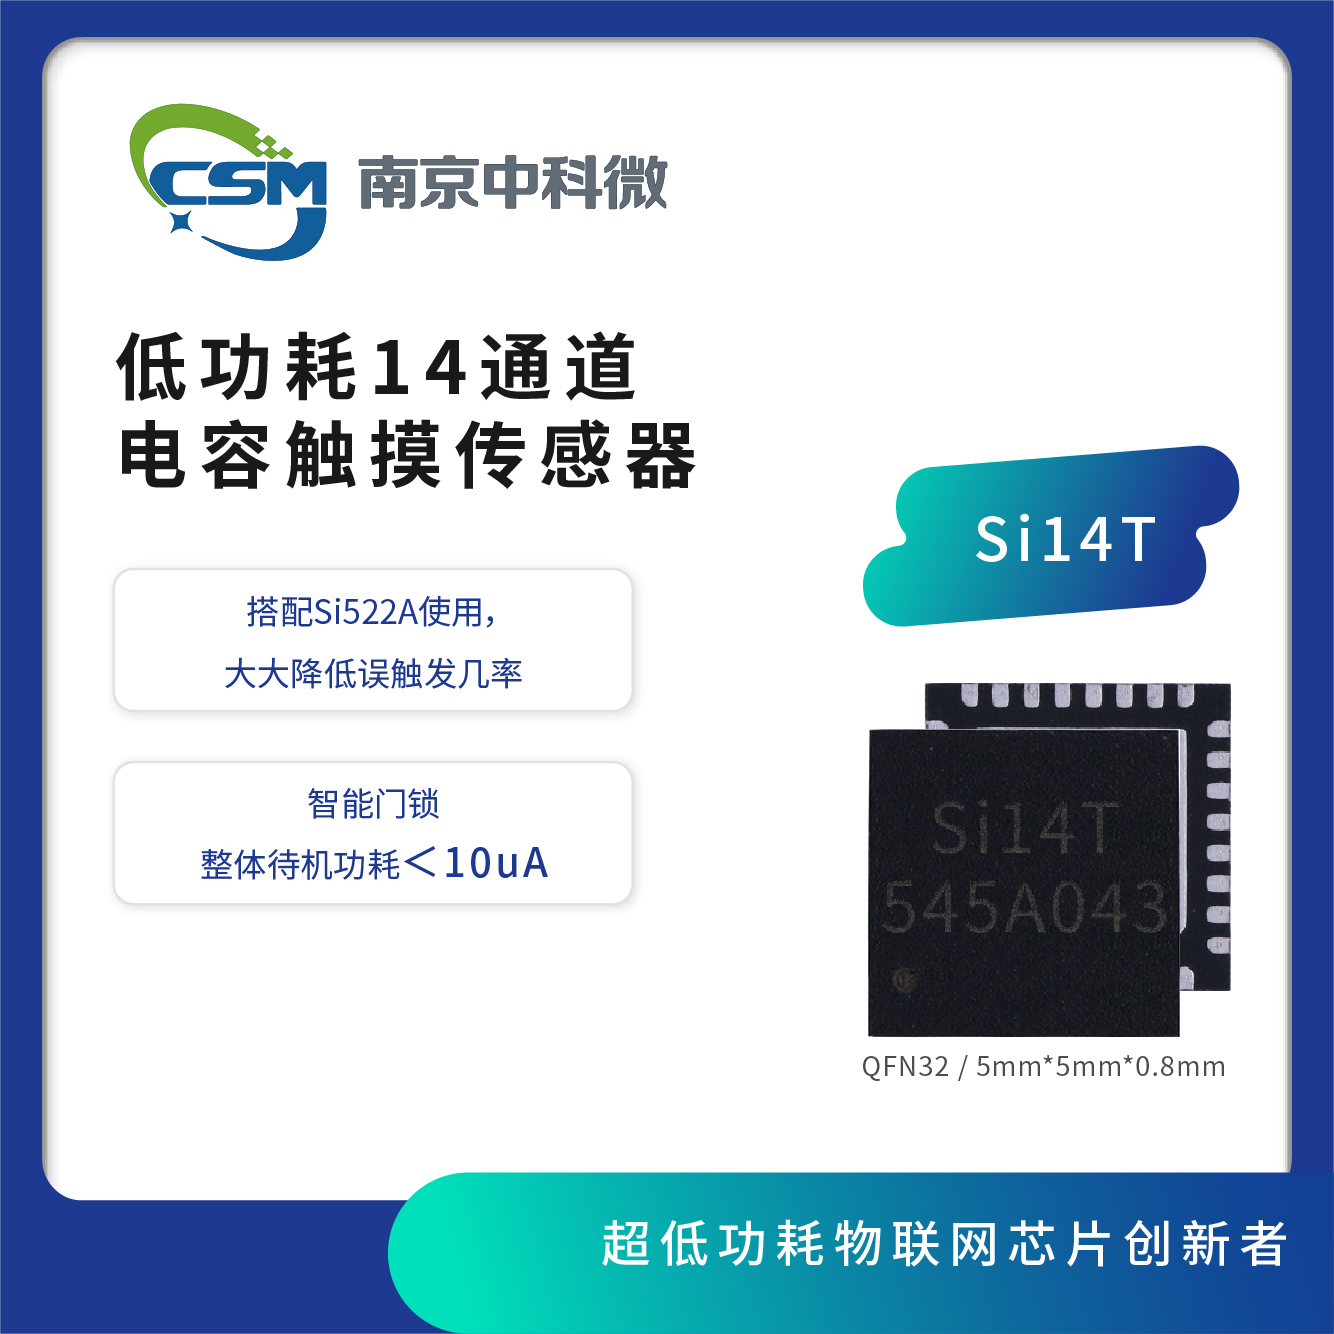 Touch chip Si14T